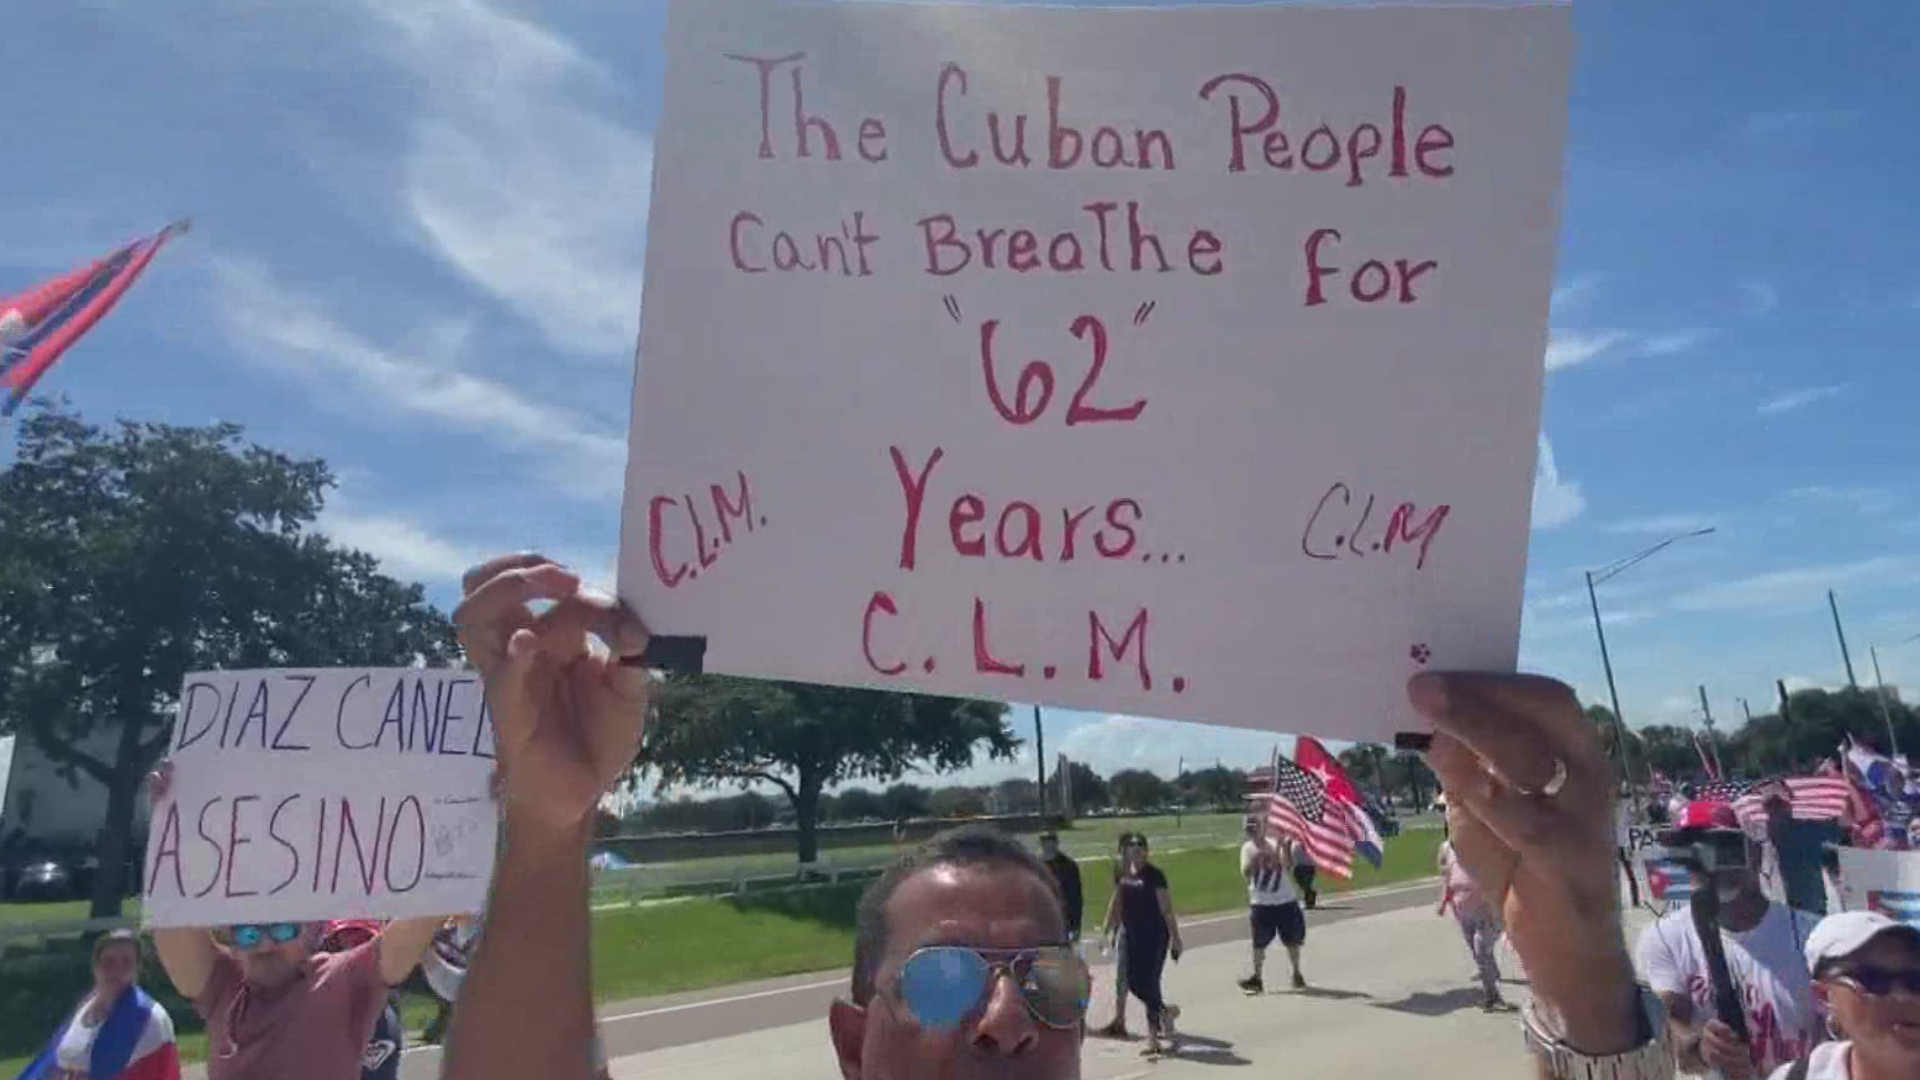 Protesters say the communist Cuban government is to blame for food and vaccine shortages, creating dangerous living situations.